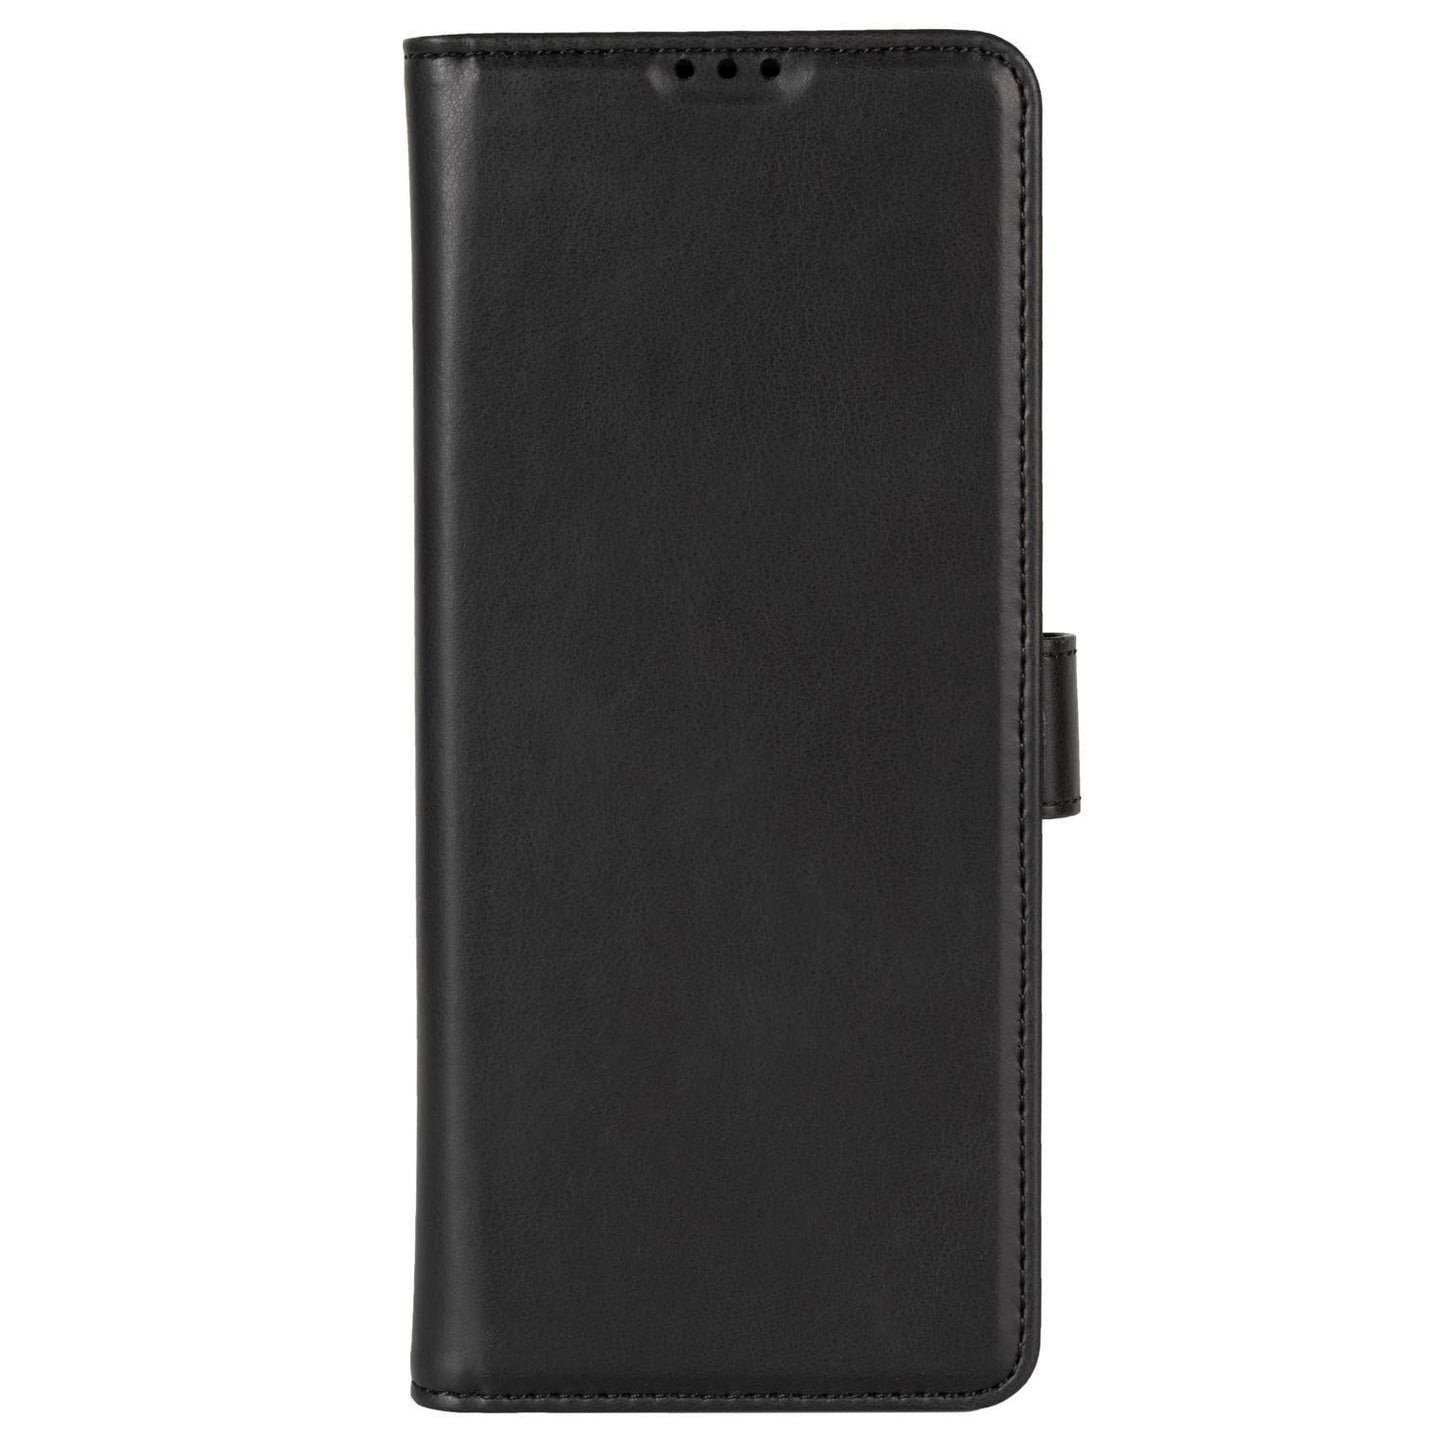 Phone Wallet for iPhone 12 Mini